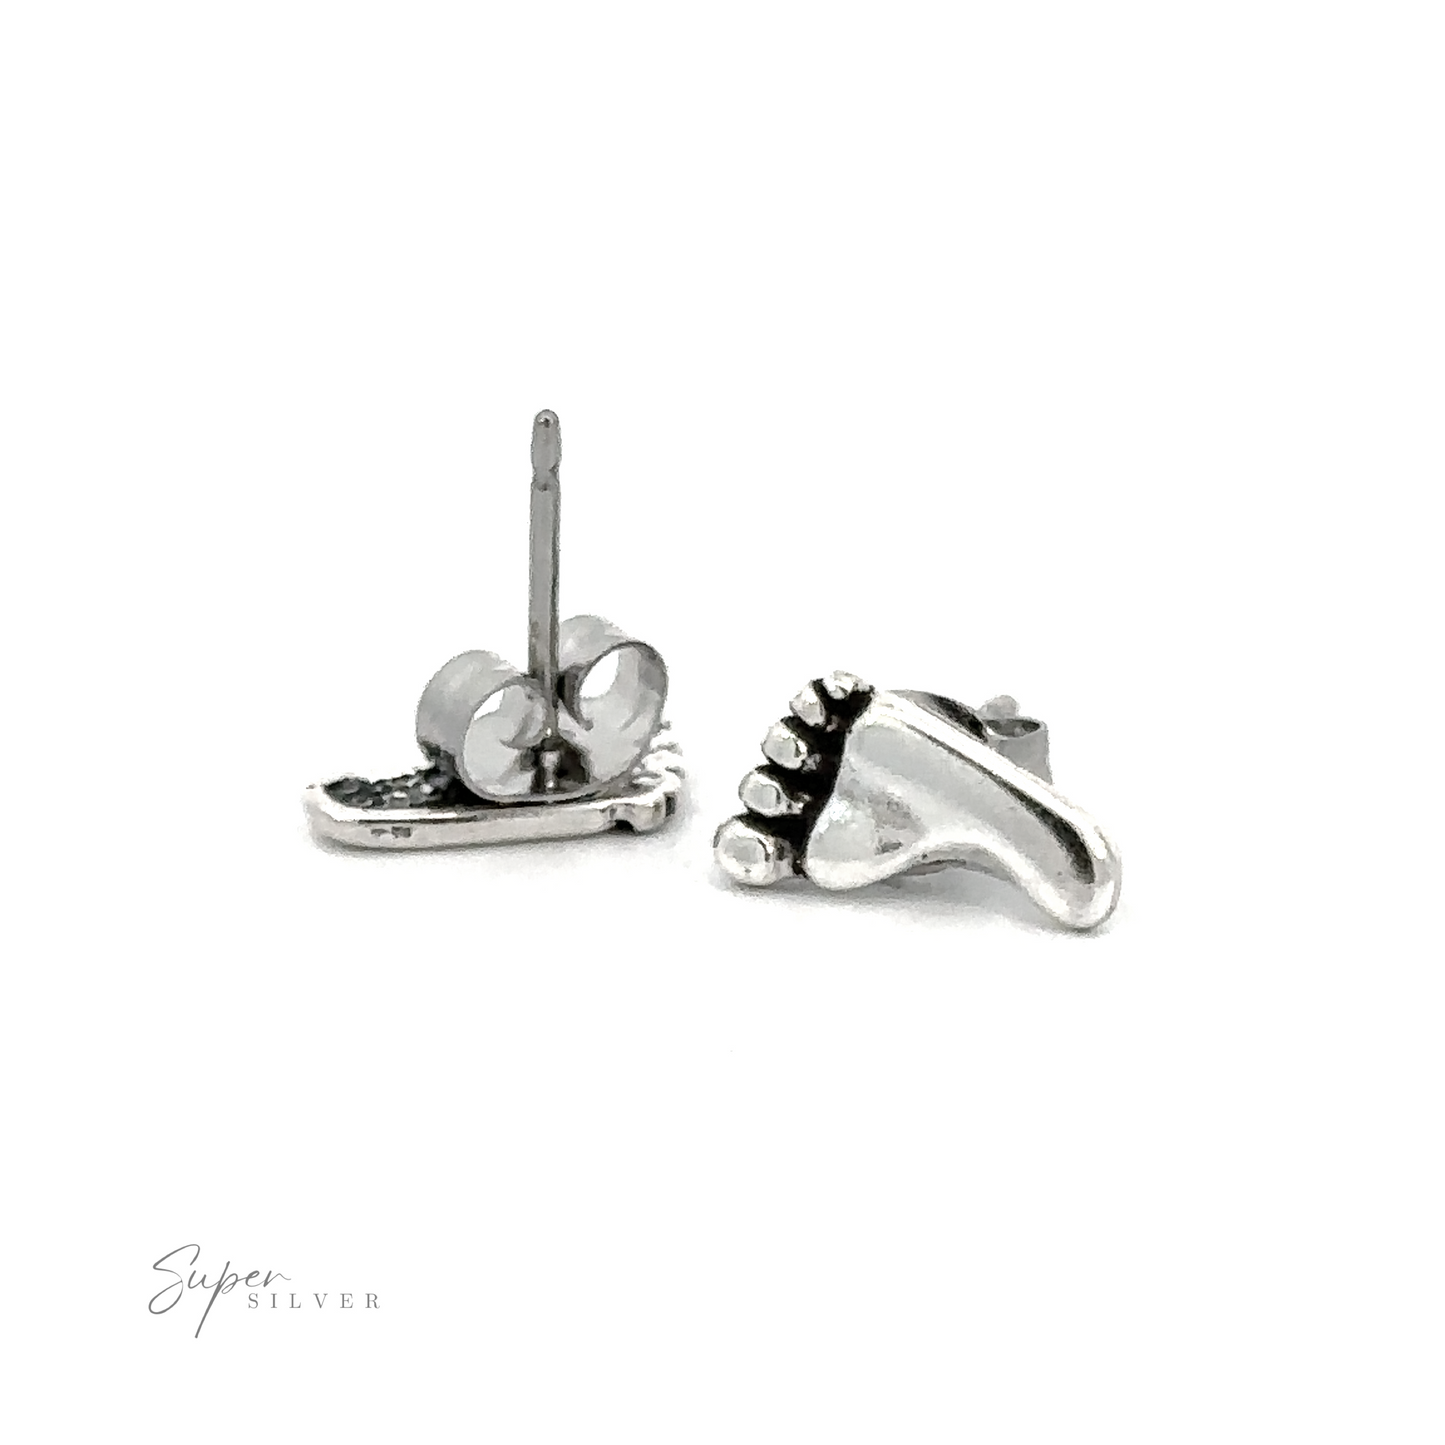 A pair of Foot Studs on a white background.